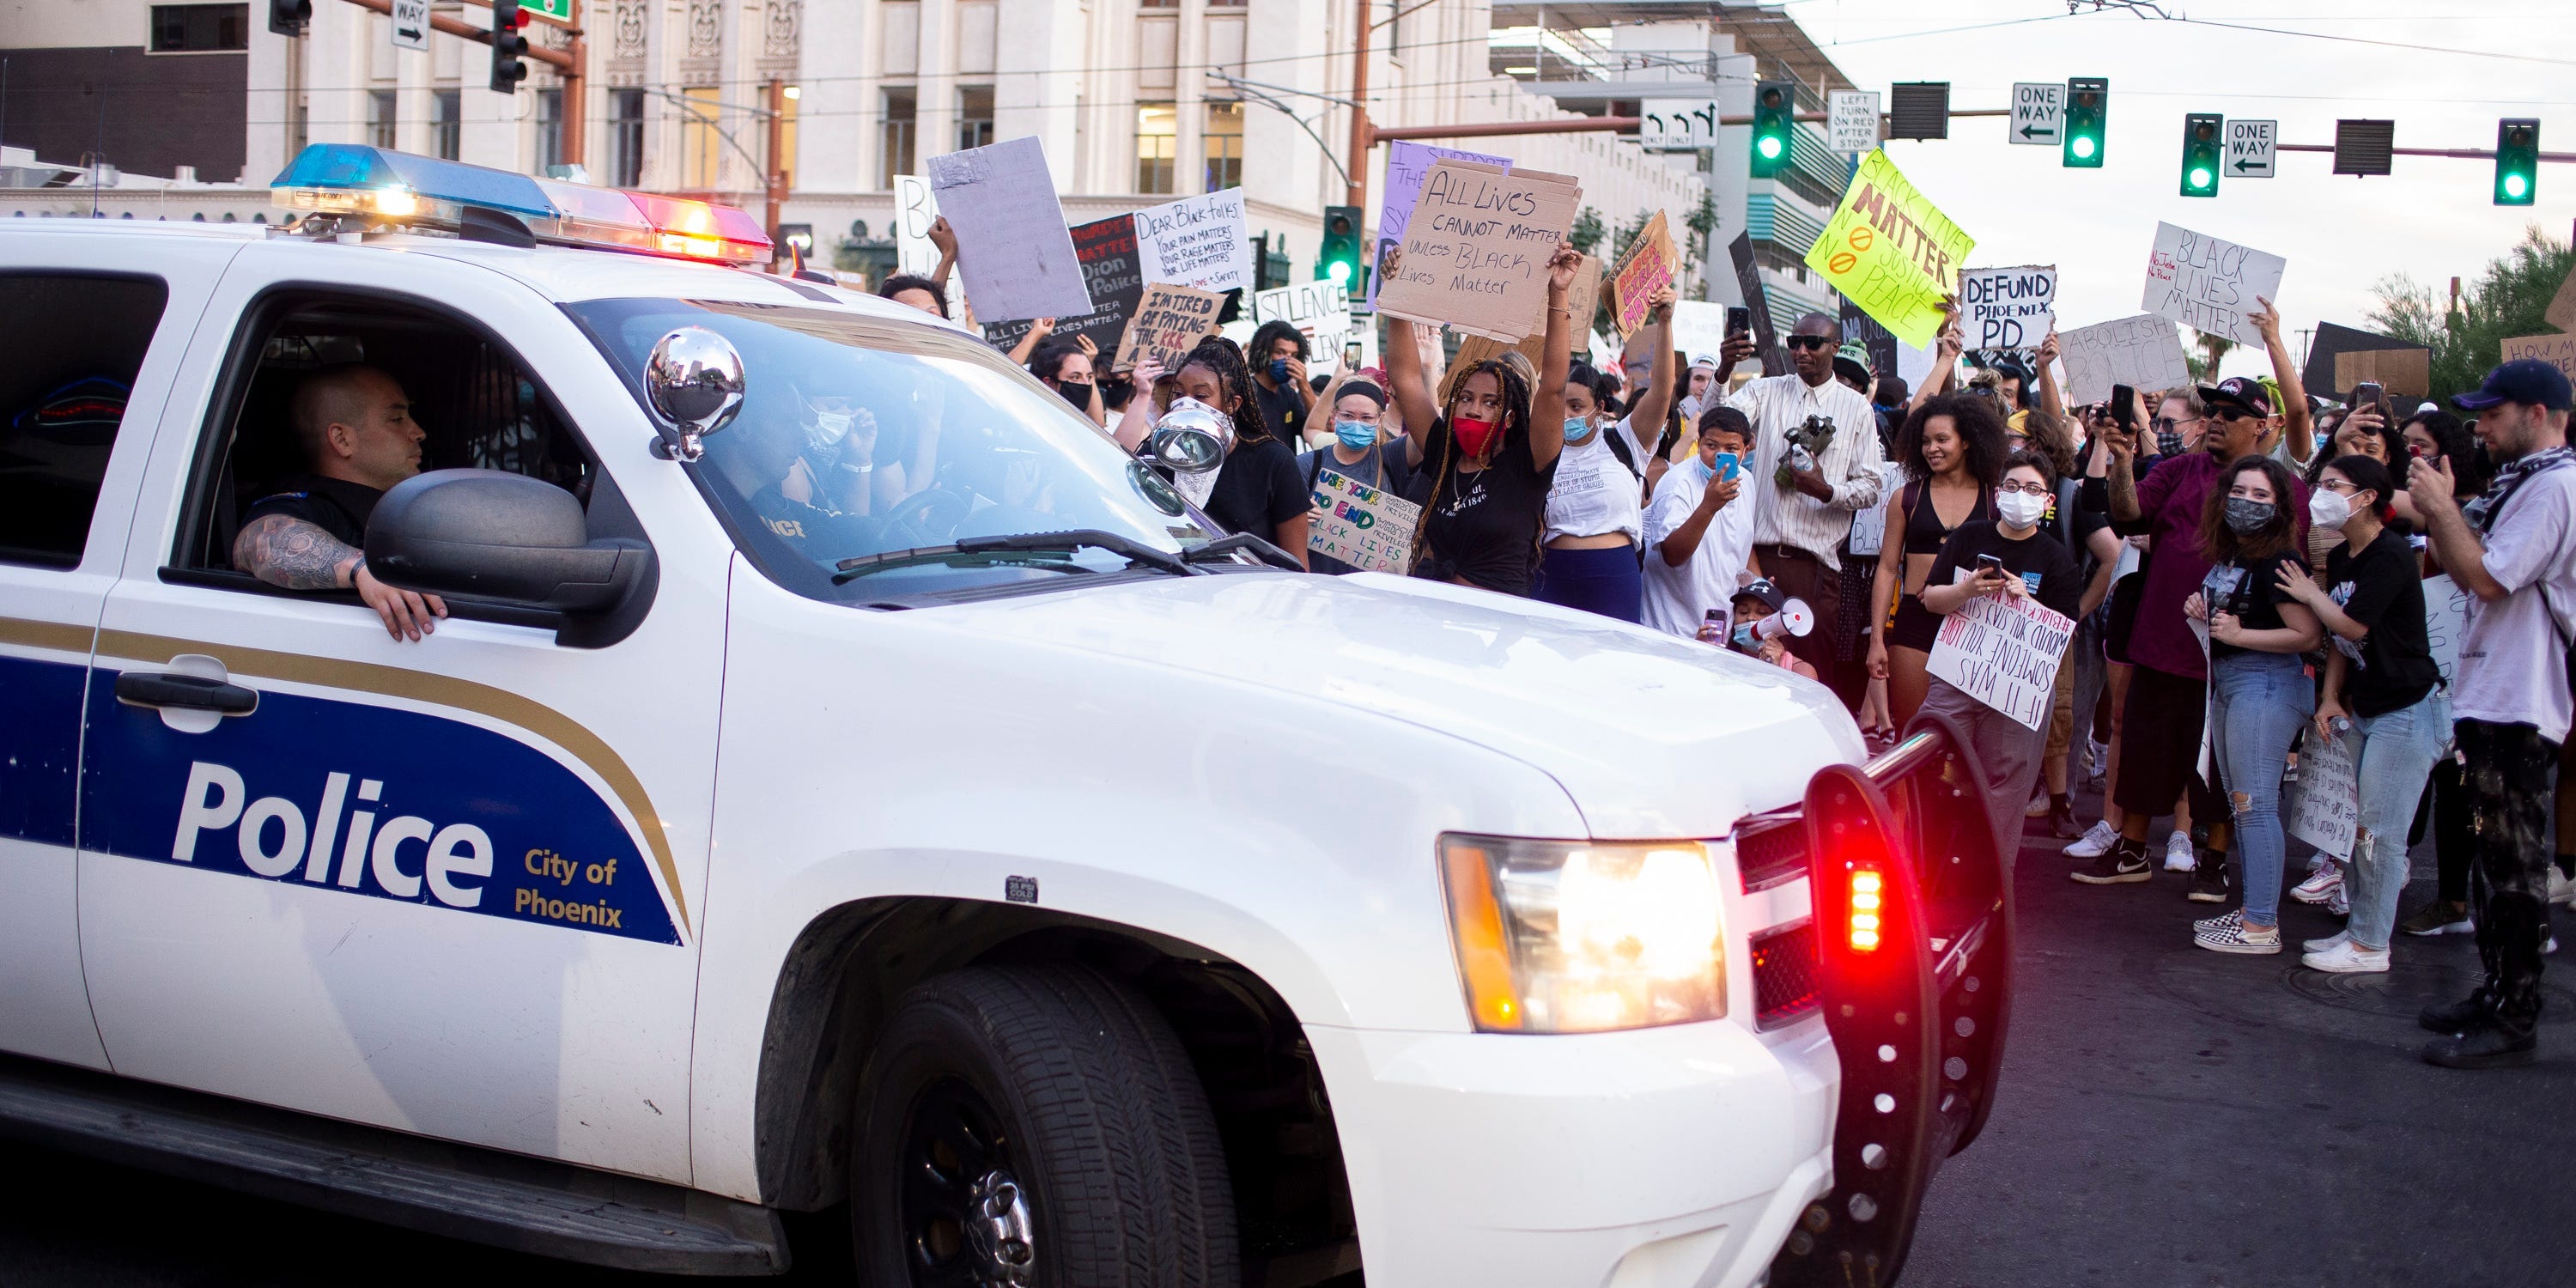 A Phoenix police vehicle is surrounded by protesters on June 4, 2020.